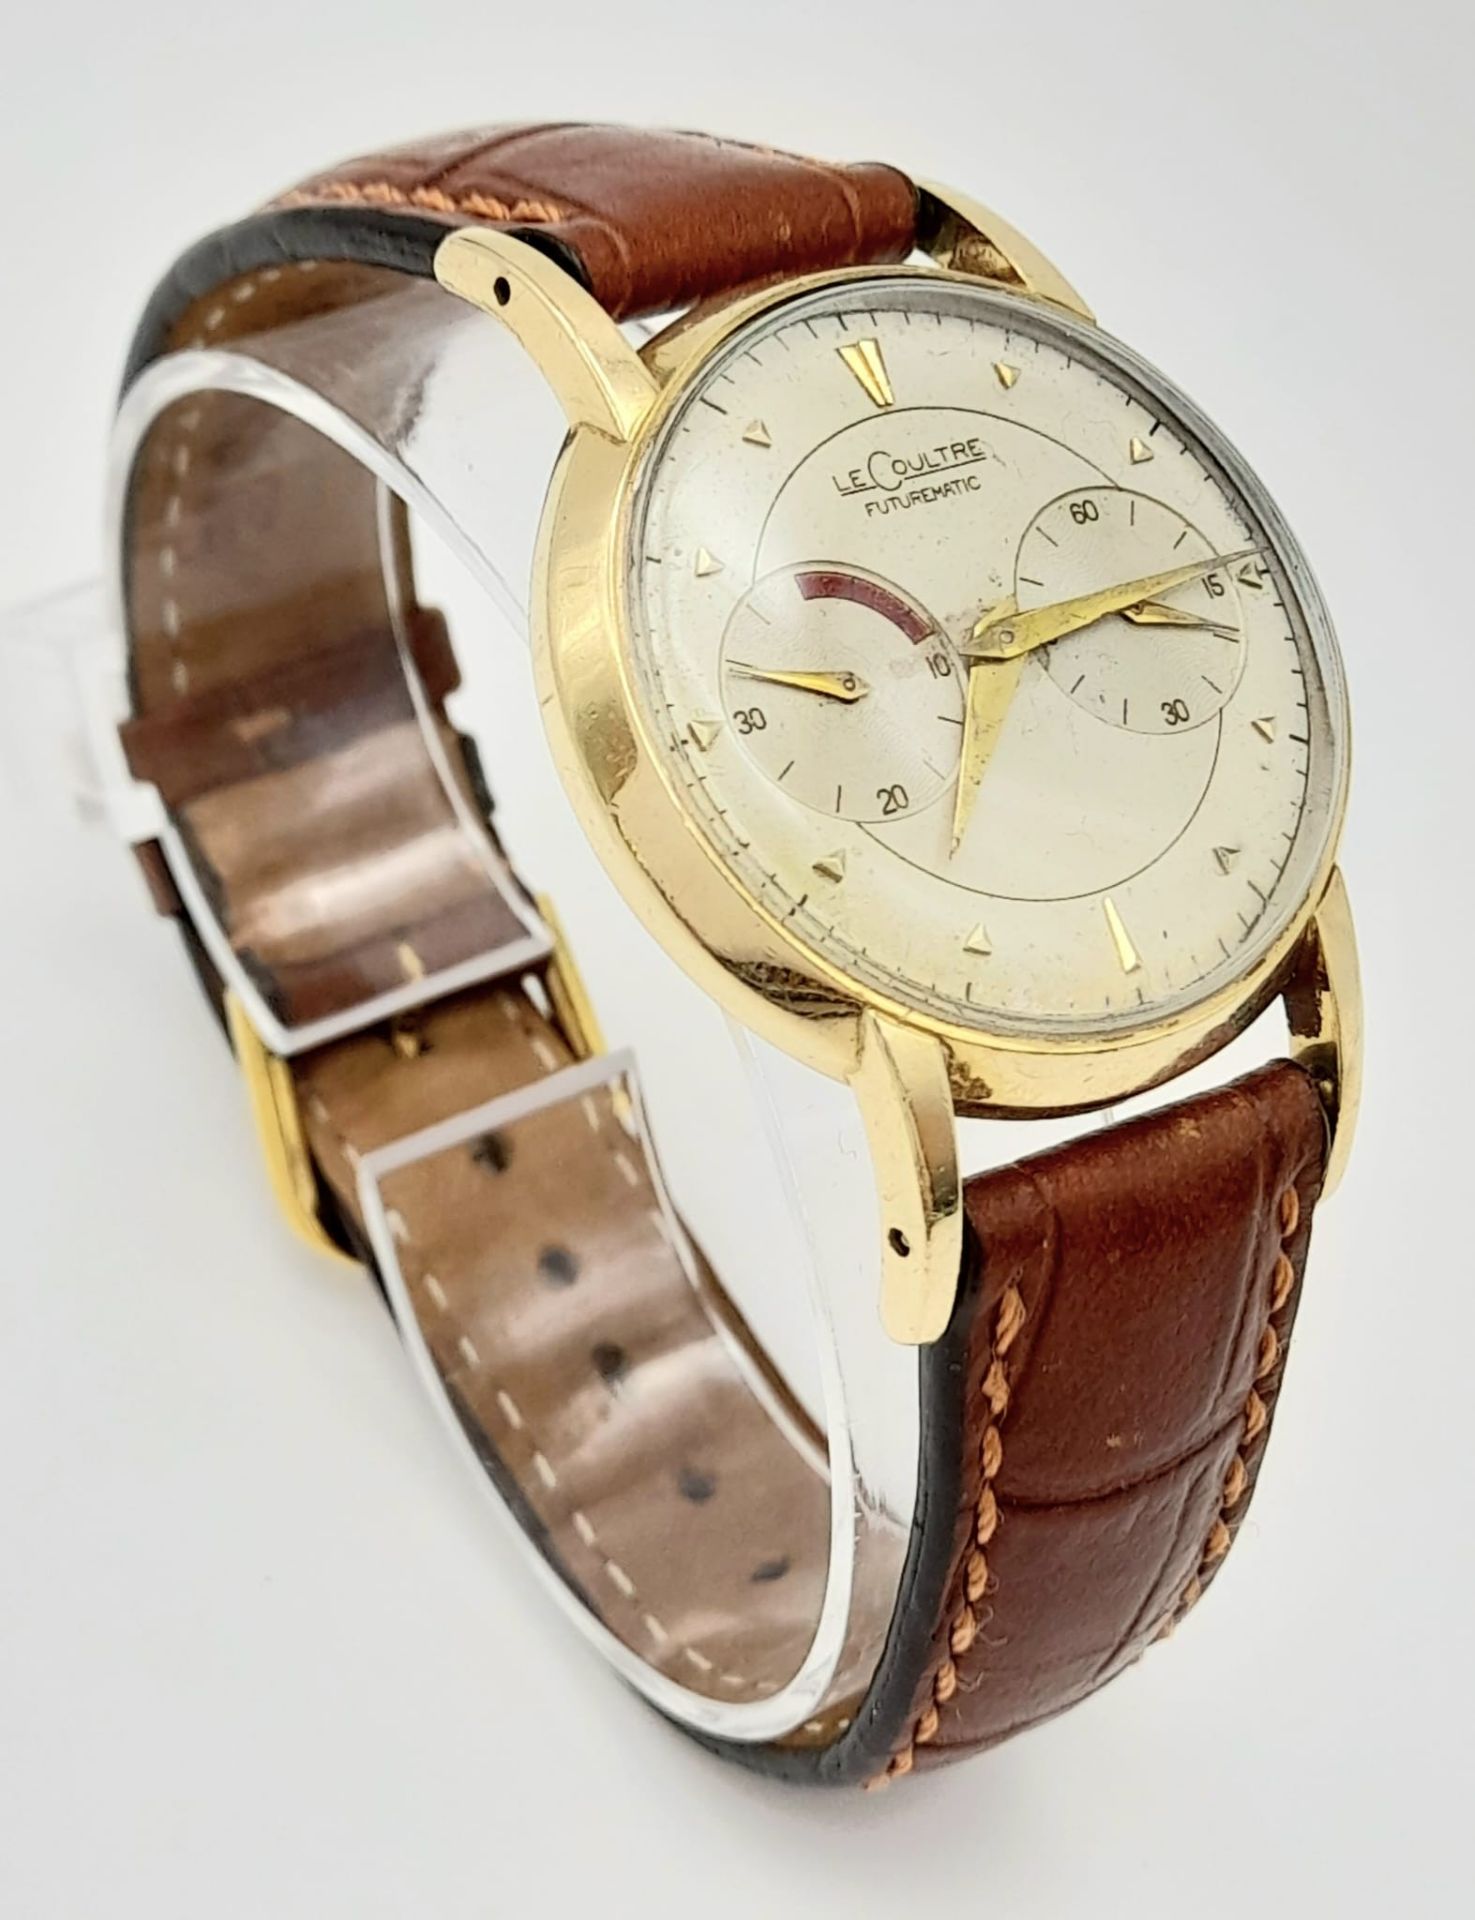 A Vintage Jaeger Le Coultre Futurematic Gents Watch.Brown leather strap. Case - 35mm. White dial - Image 2 of 7